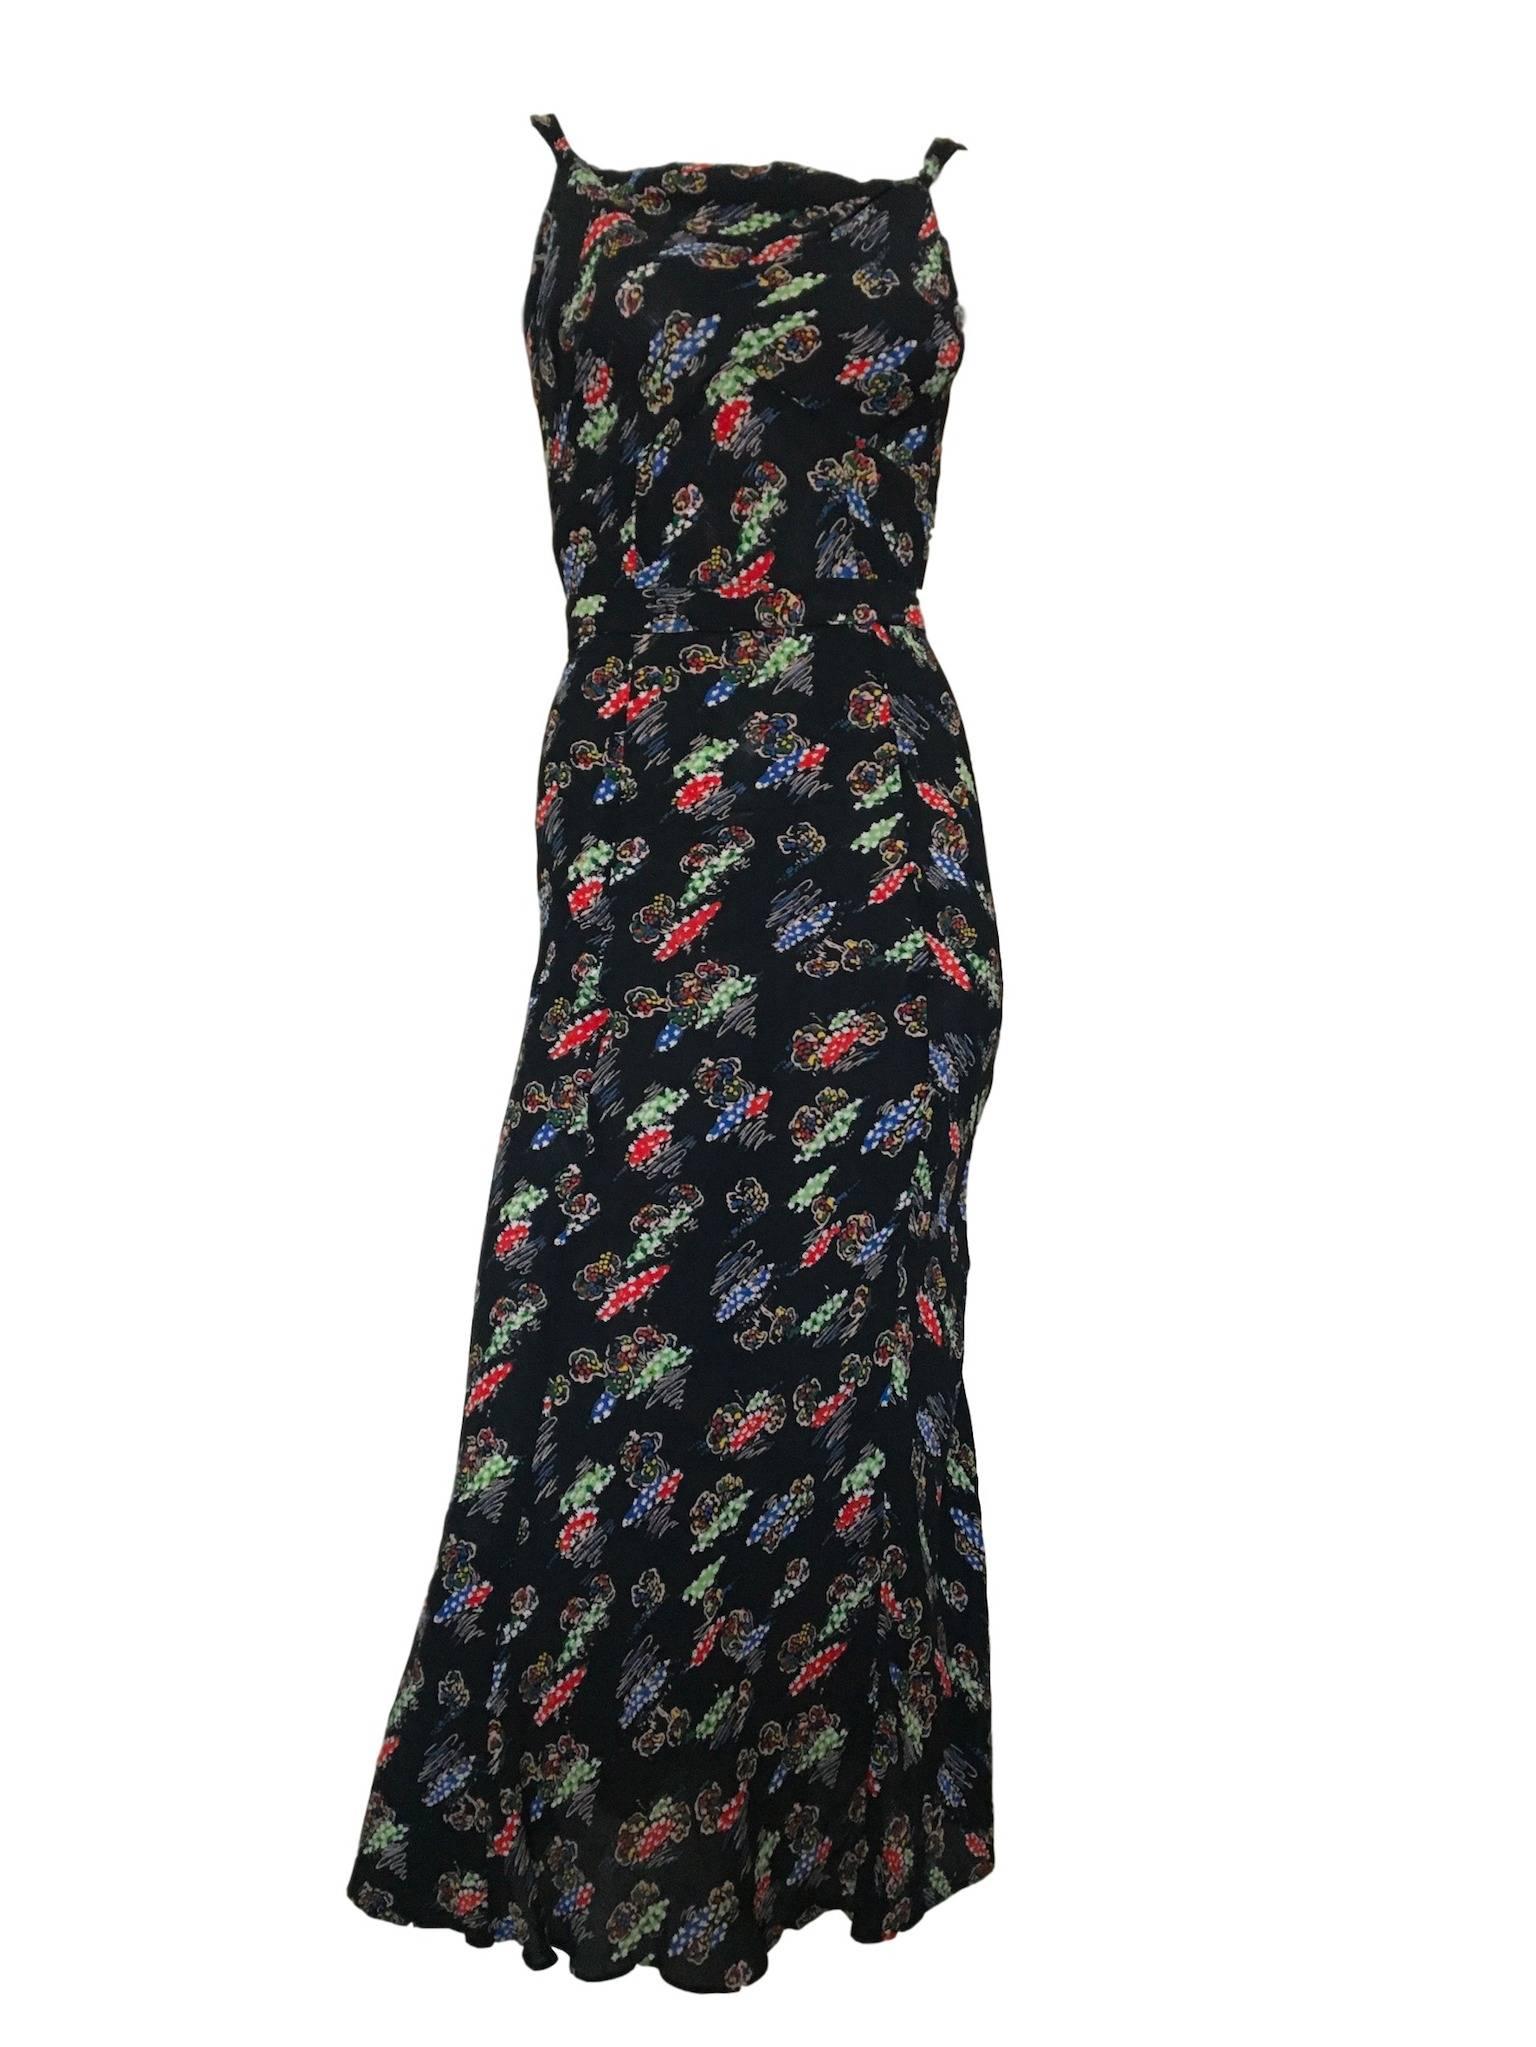 Vintage 1930s Bourne & Hollingsworth black crimped silk crepe material with colourful novelty print of trees with flowers, has matching belt and bolero that fastens at the front with a double sided button. An exceptional original piece, the material